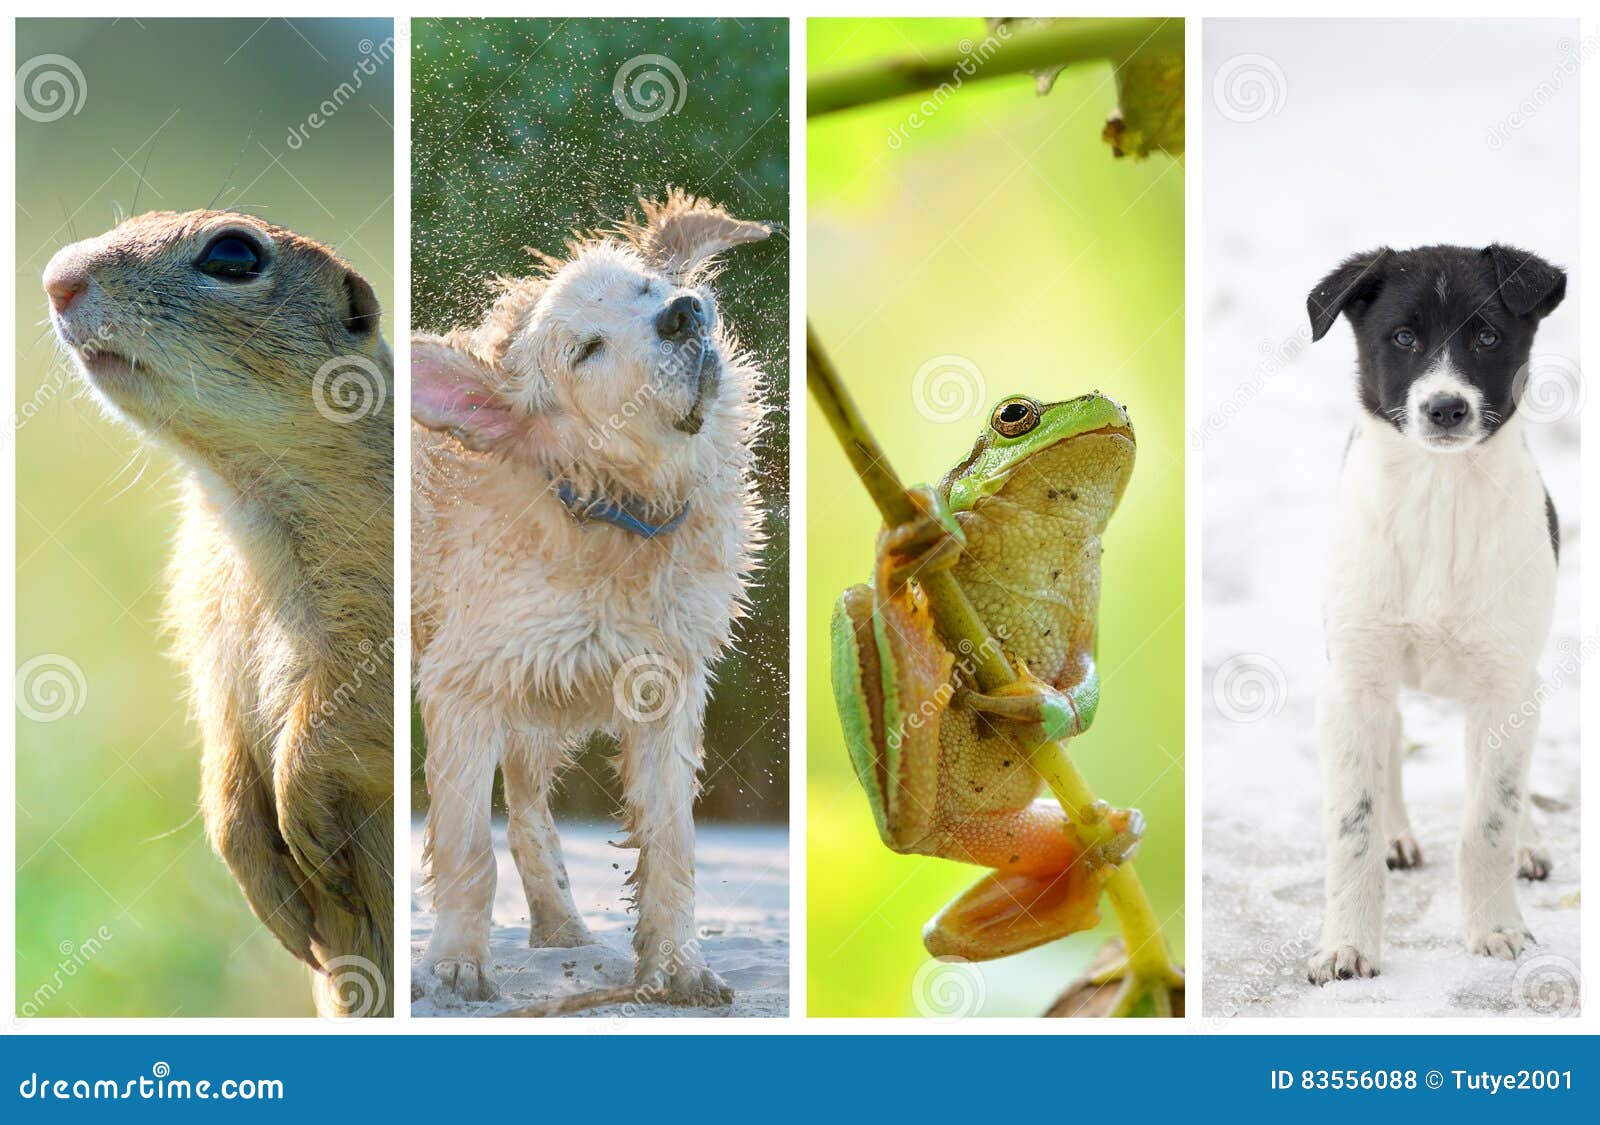 Different Seasons of the Year. Life Cycle Concept Stock Photo - Image